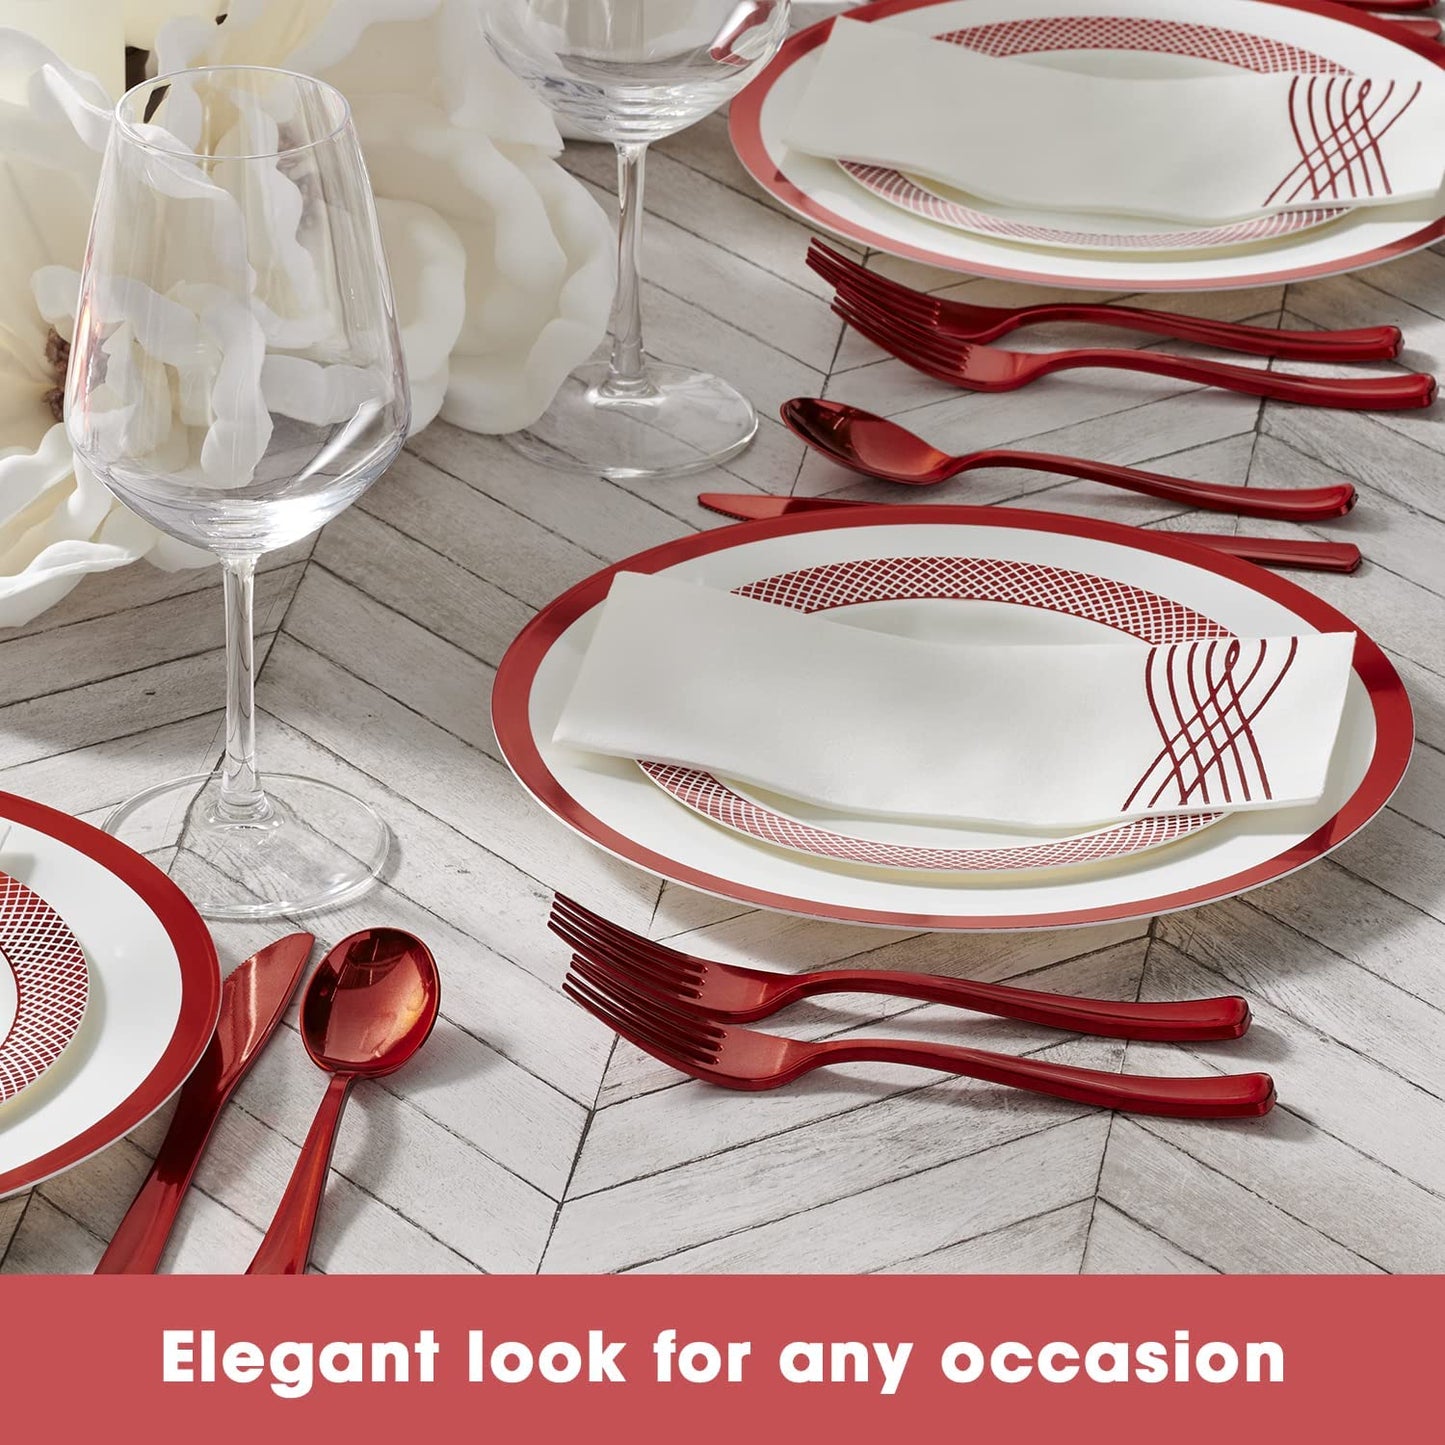 White and Red Disposable Dinnerware Set